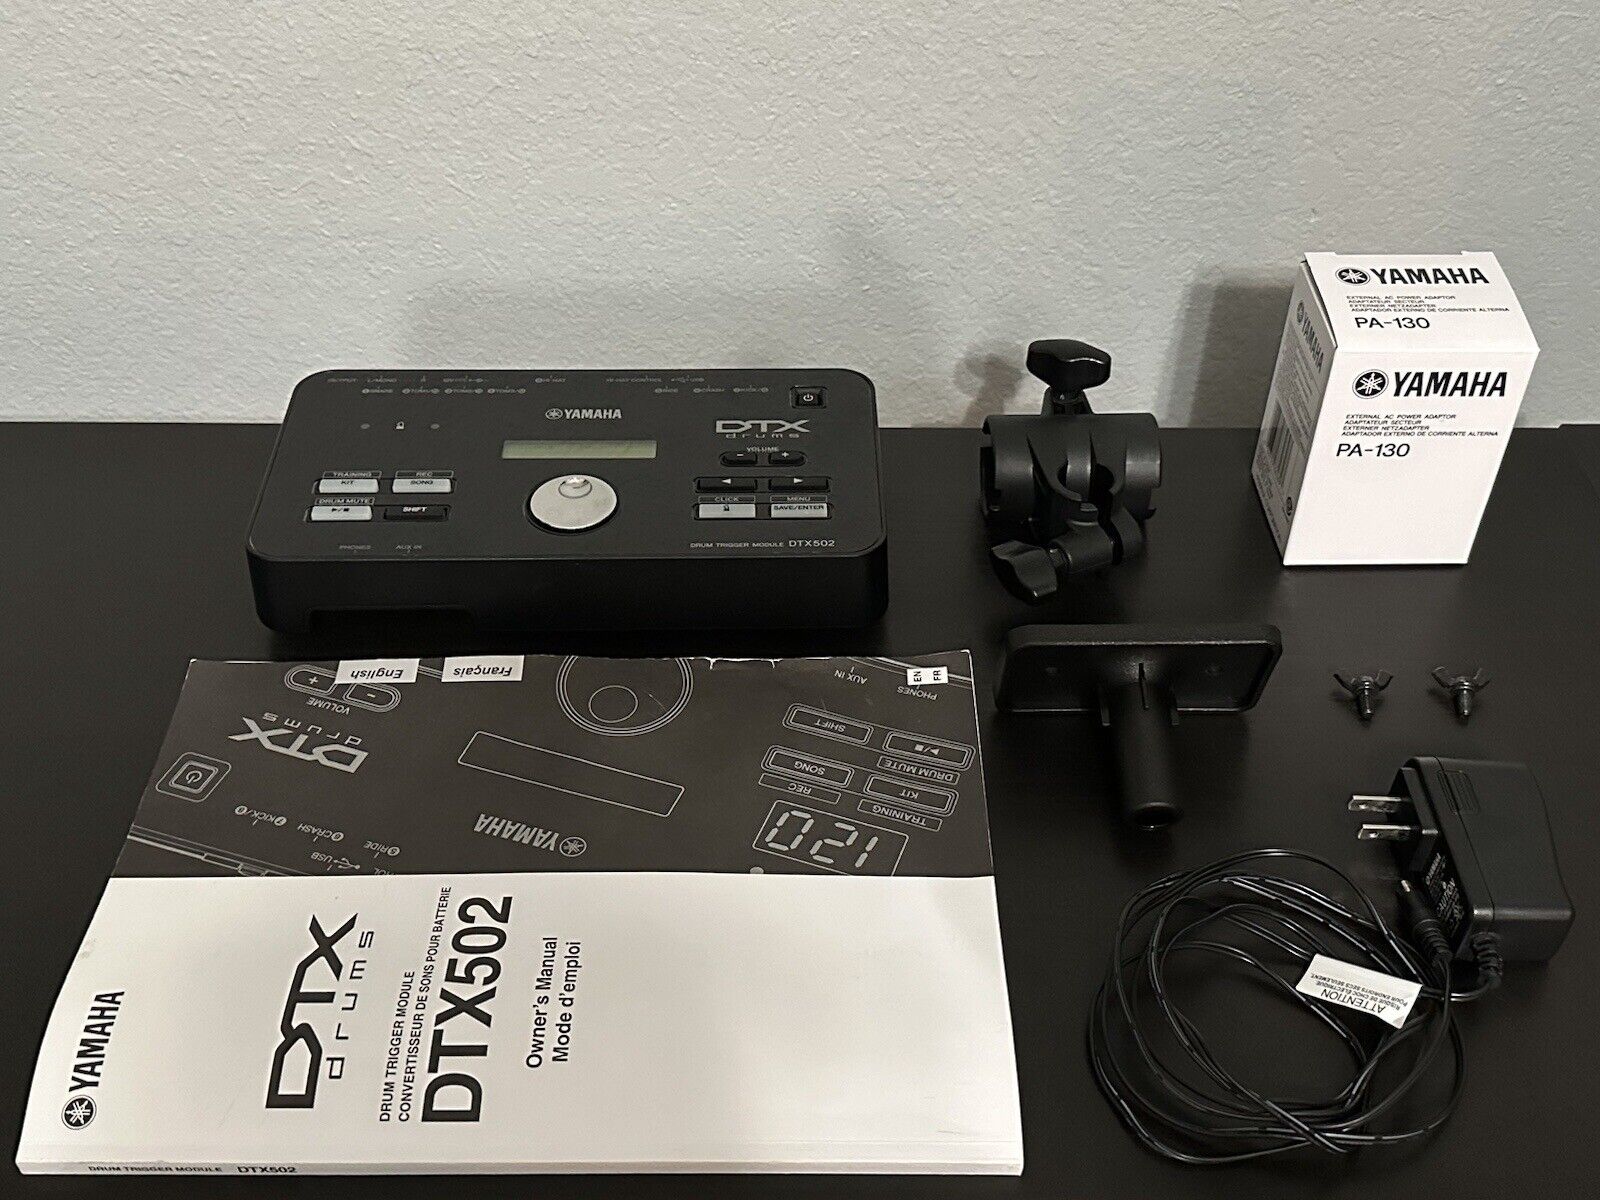 Yamaha DTX502 Electronic Drum Module, TPCL-500 Clamp Mount, PA-130 Cable, Manual